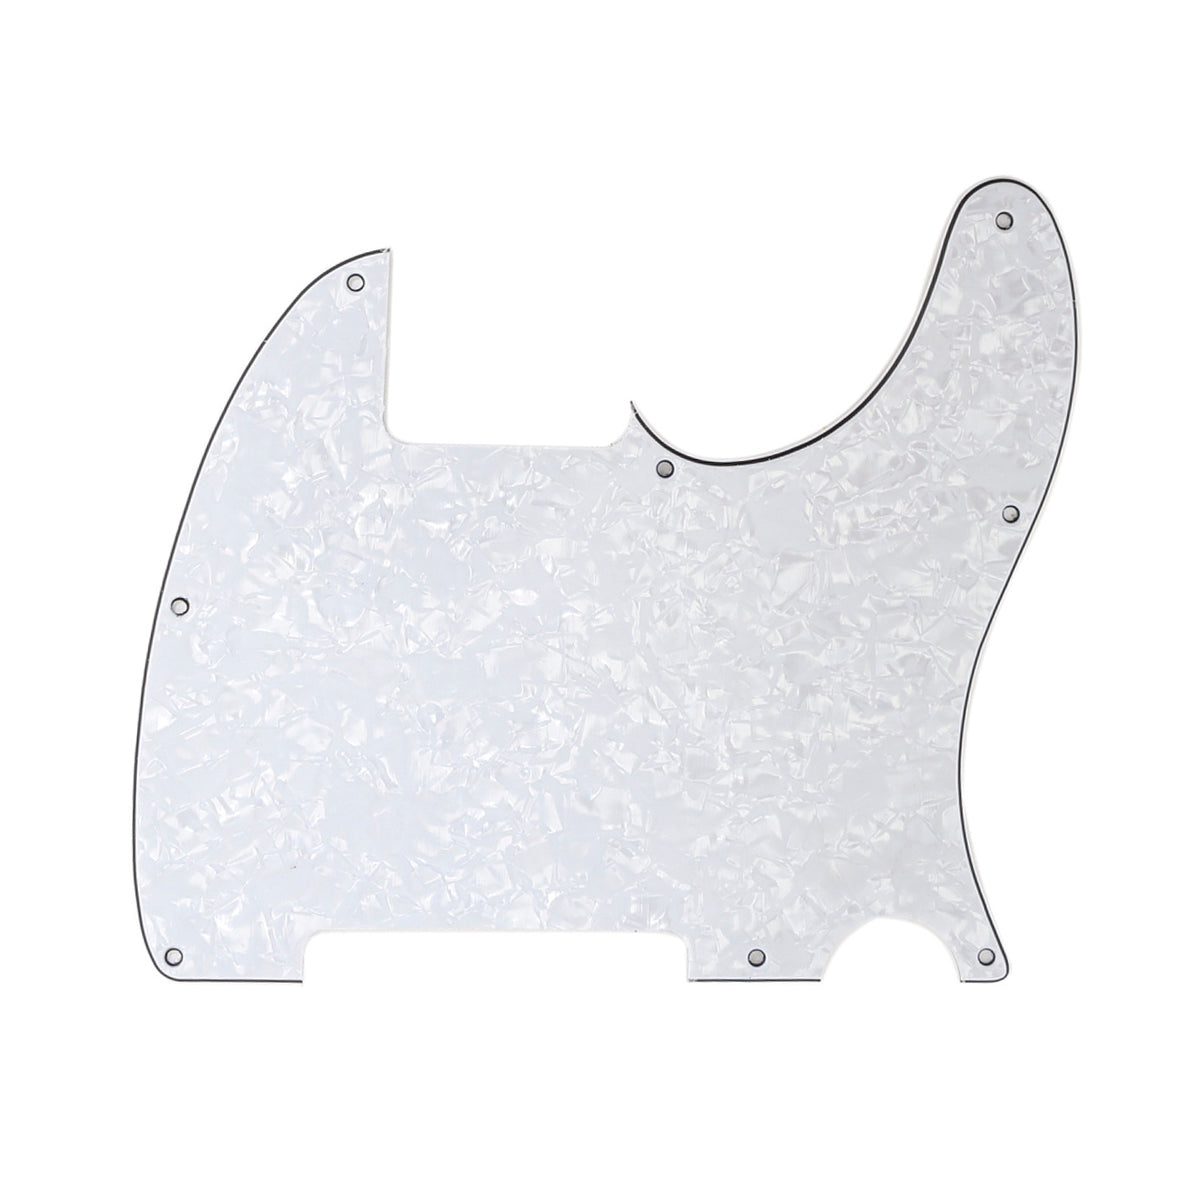 Musiclily 8 Hole Tele Pickguard Blank for Fender USA/Mexican Telecaster Esquire Guitar, 4Ply White Pearl